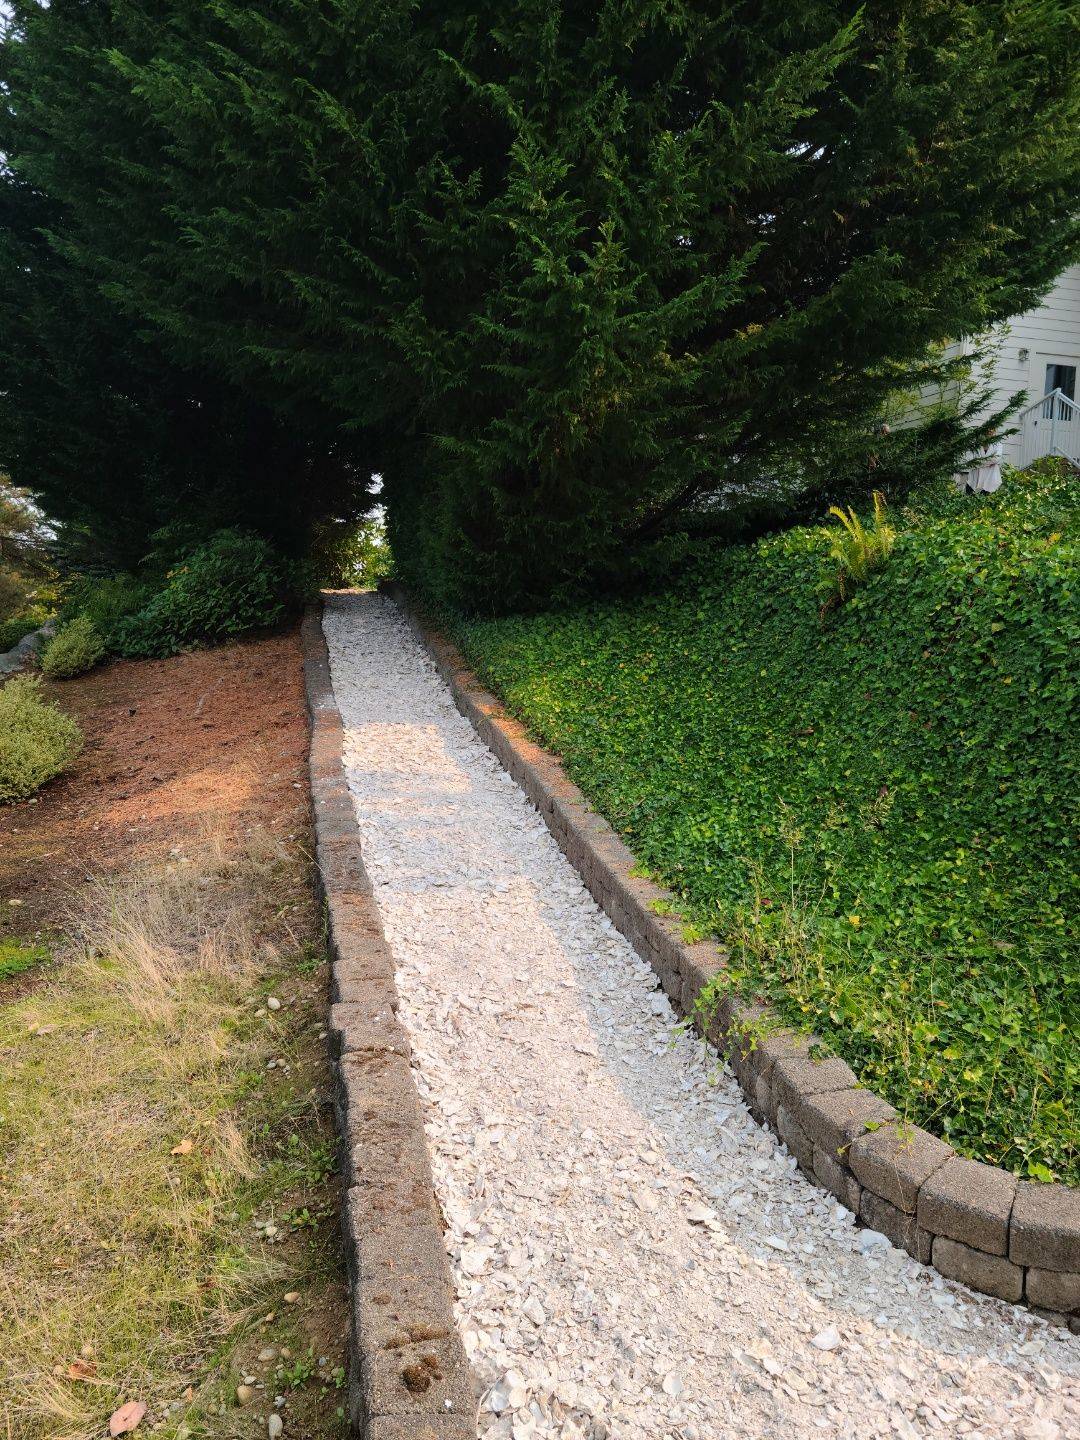 Oyster shells can be an attractive option for walking paths.